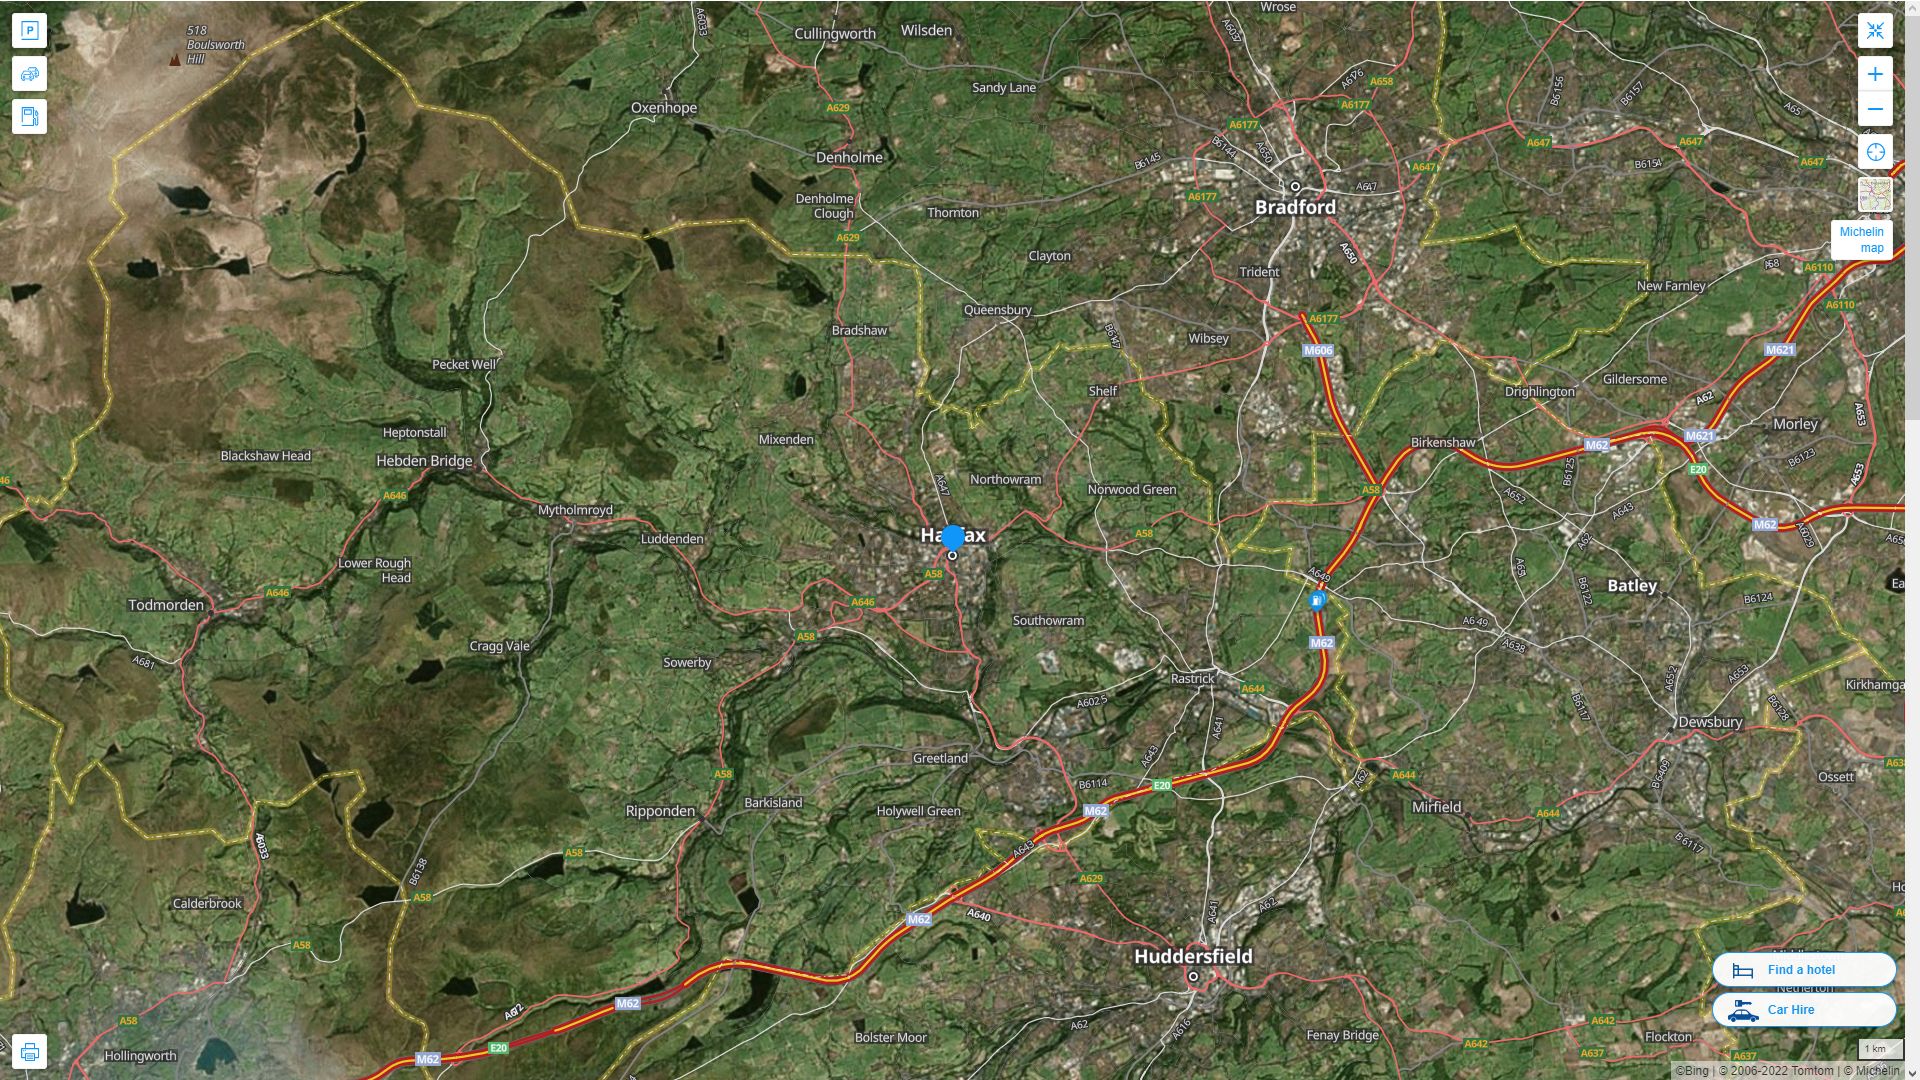 Halifax Highway and Road Map with Satellite View